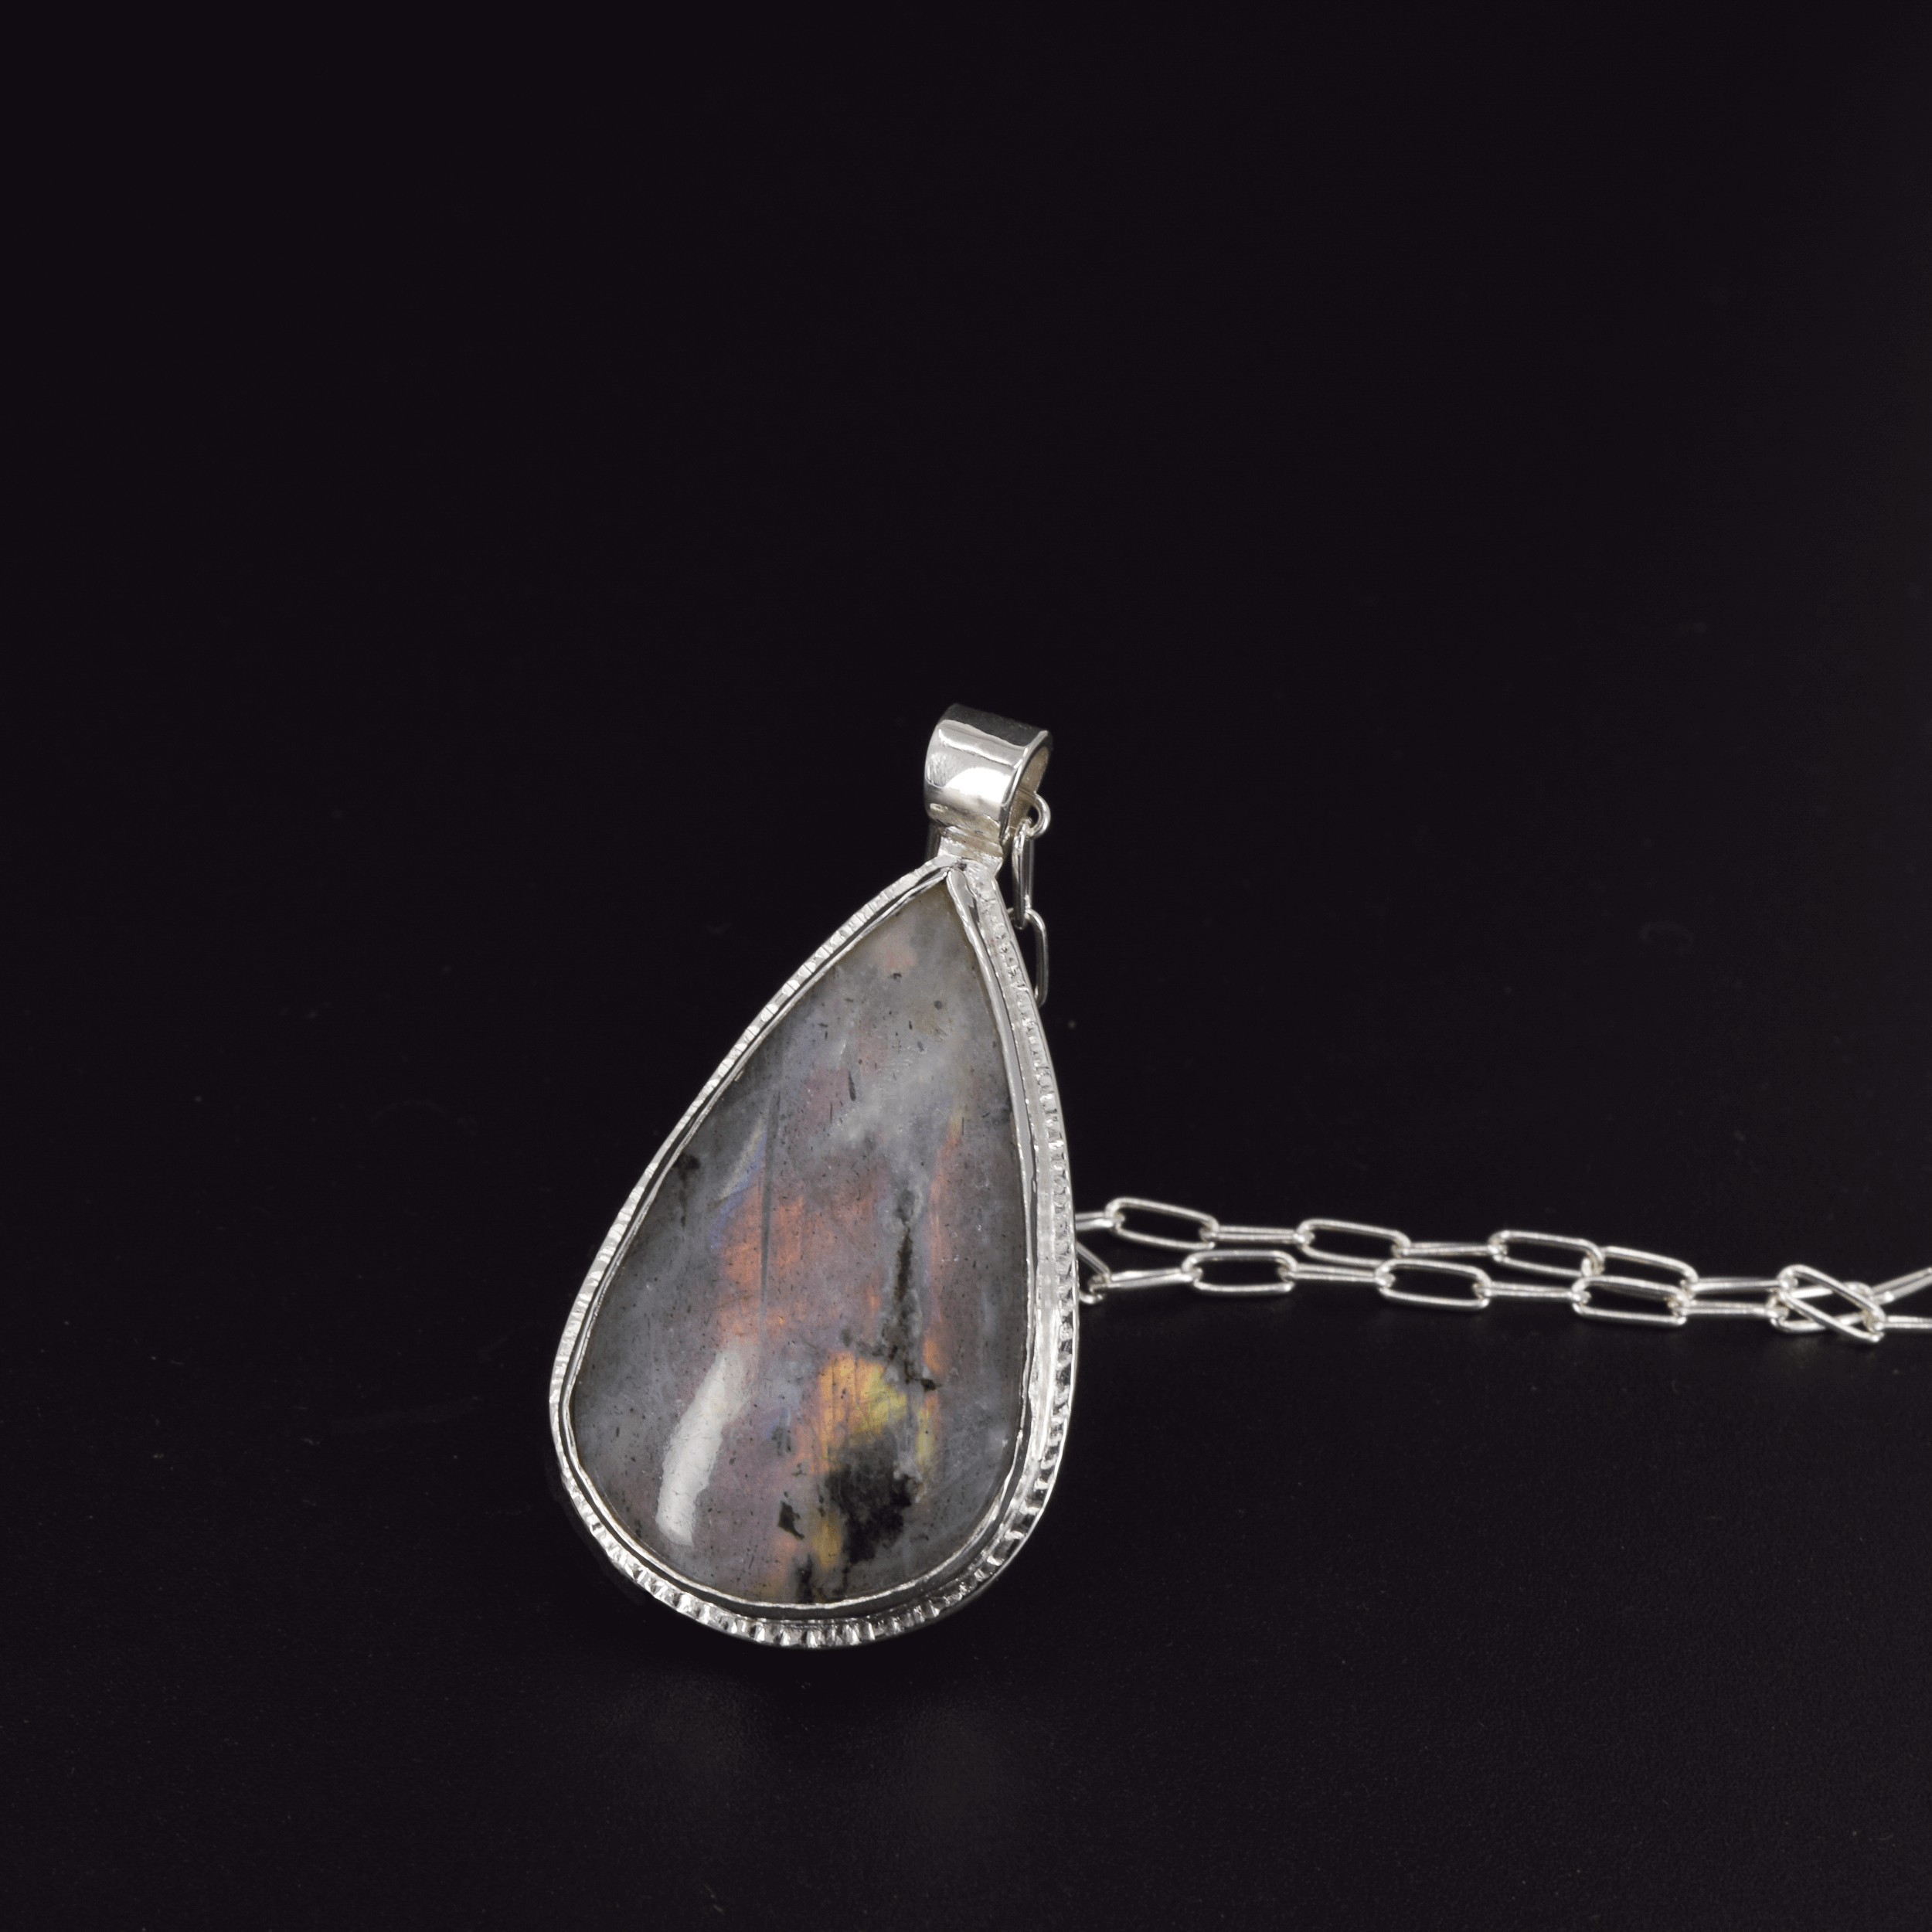 Teardrop shaped silver labradorite pendant necklace with flashes of rainbow colors set in sterling silver and hanging from a paperclip style chain 